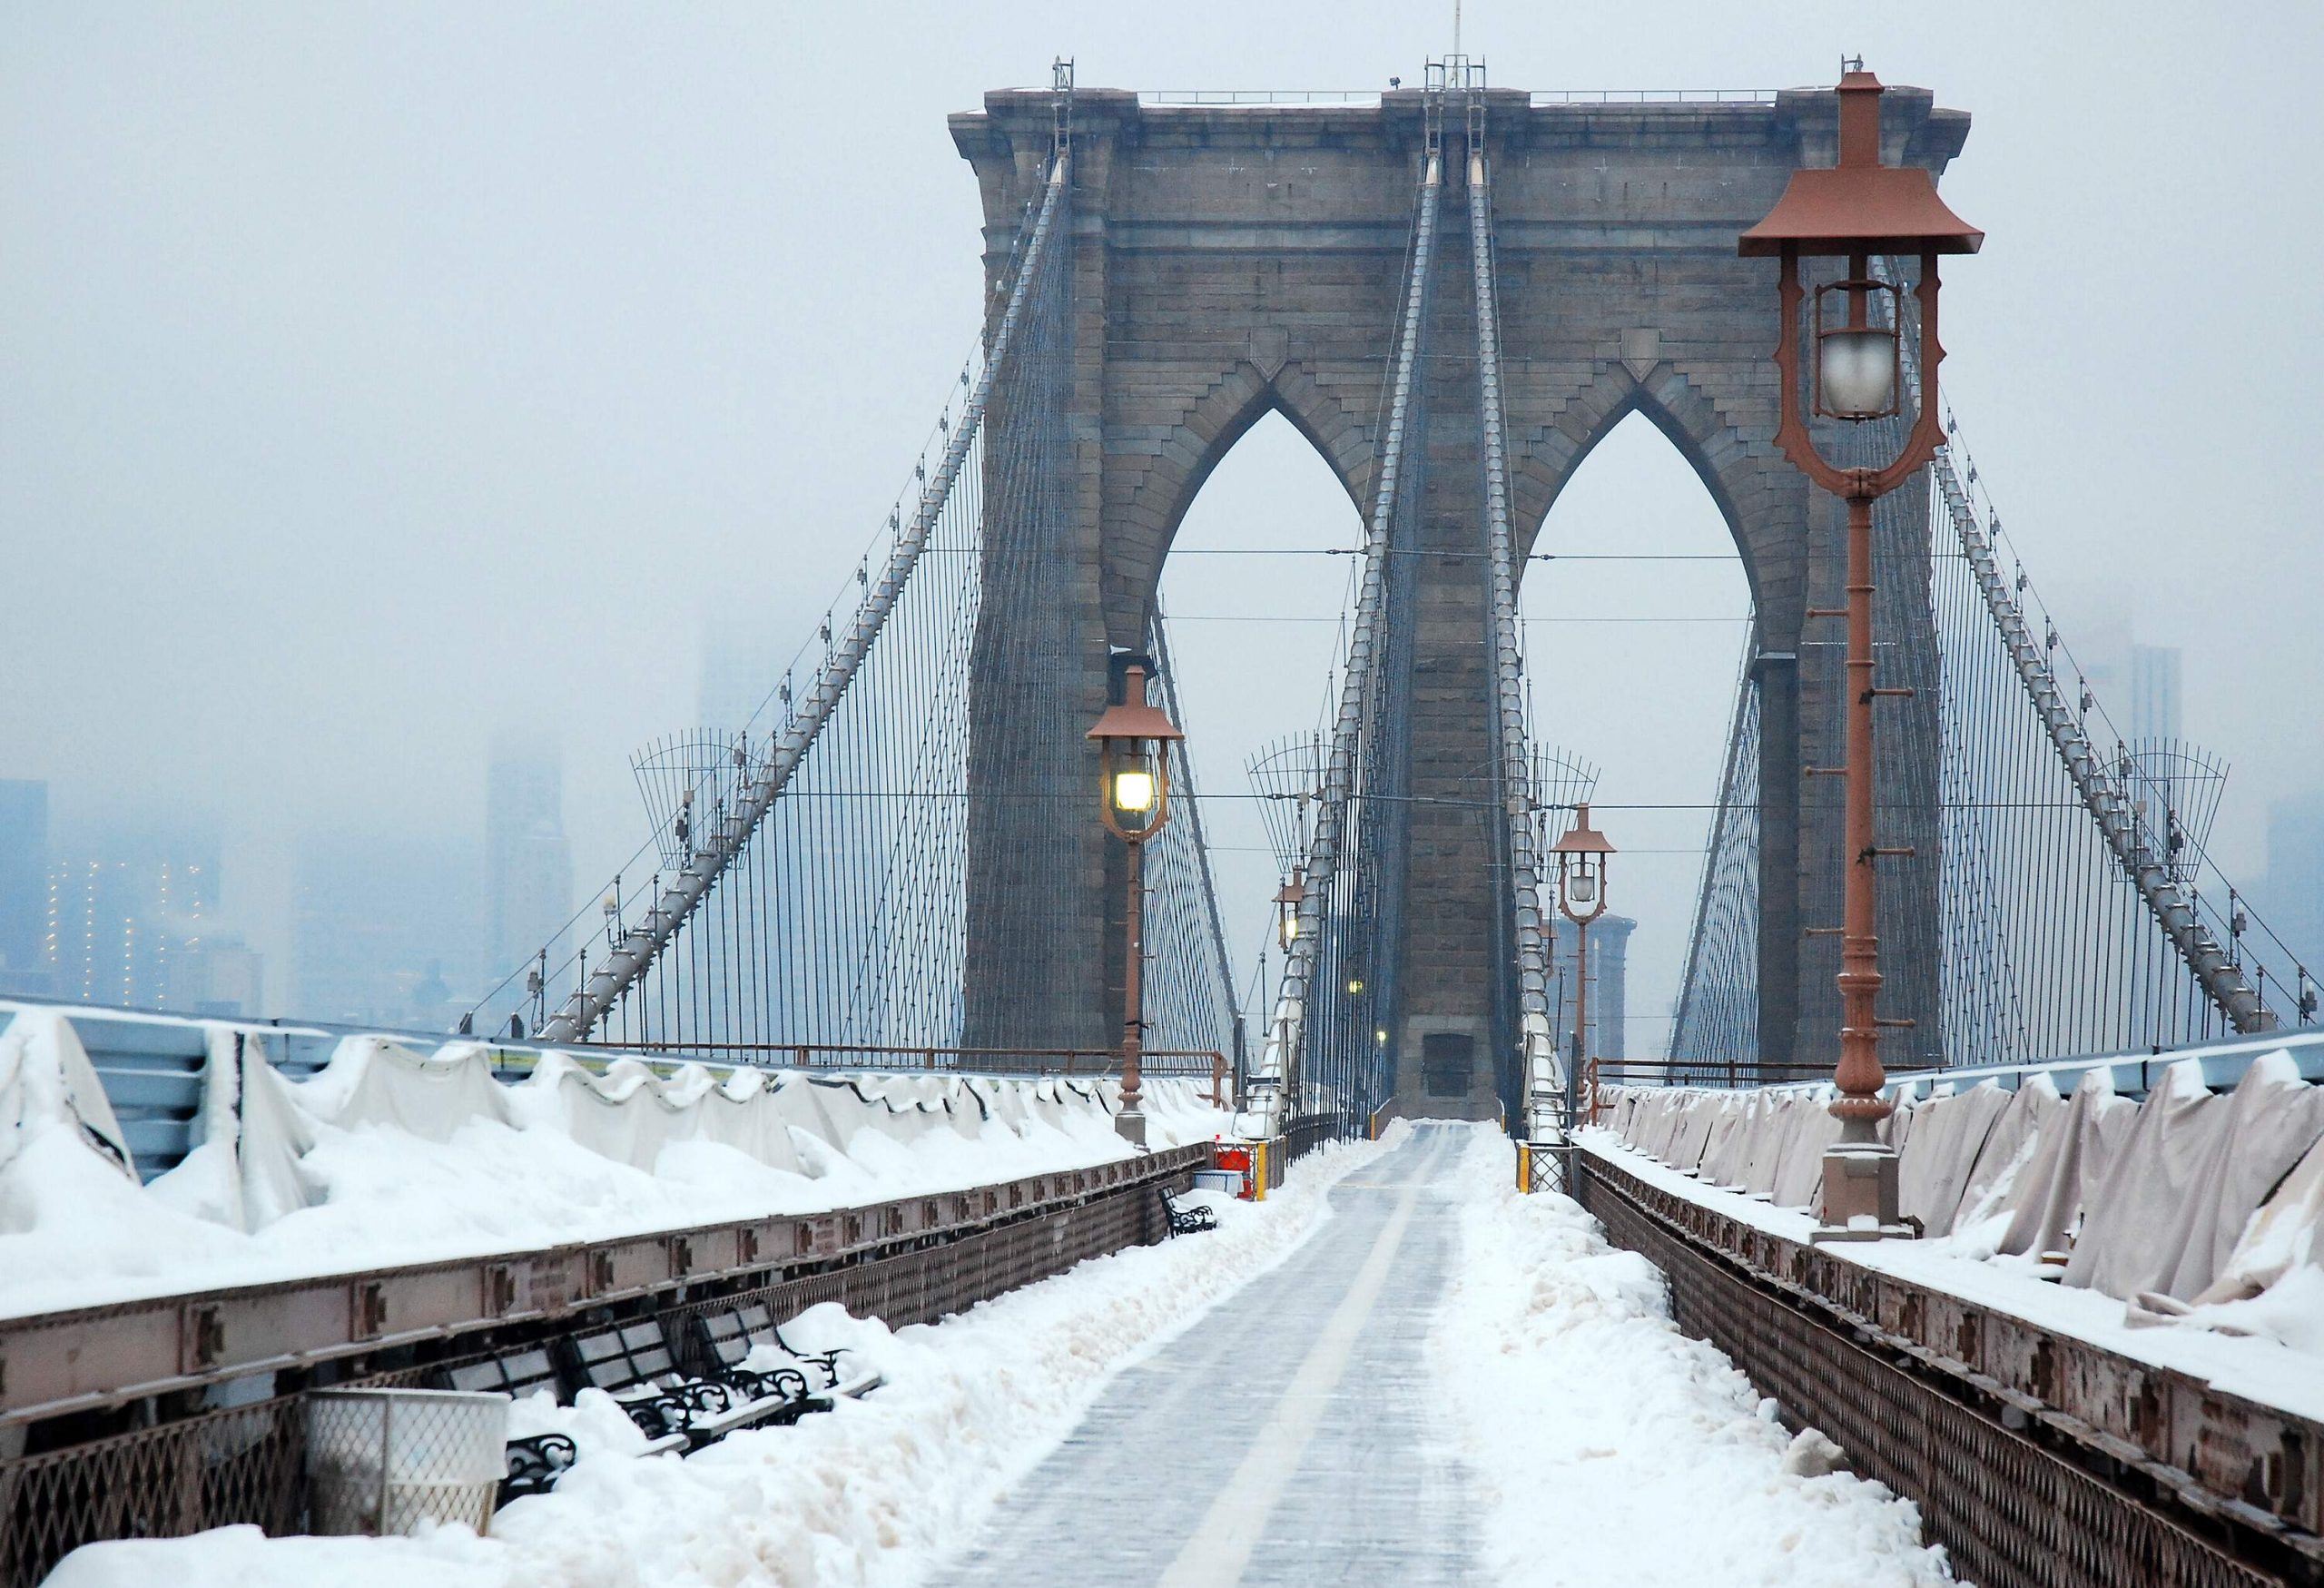 Snow covered walkway with lamp posts towards the hazy entrance of Brooklyn Bridge.